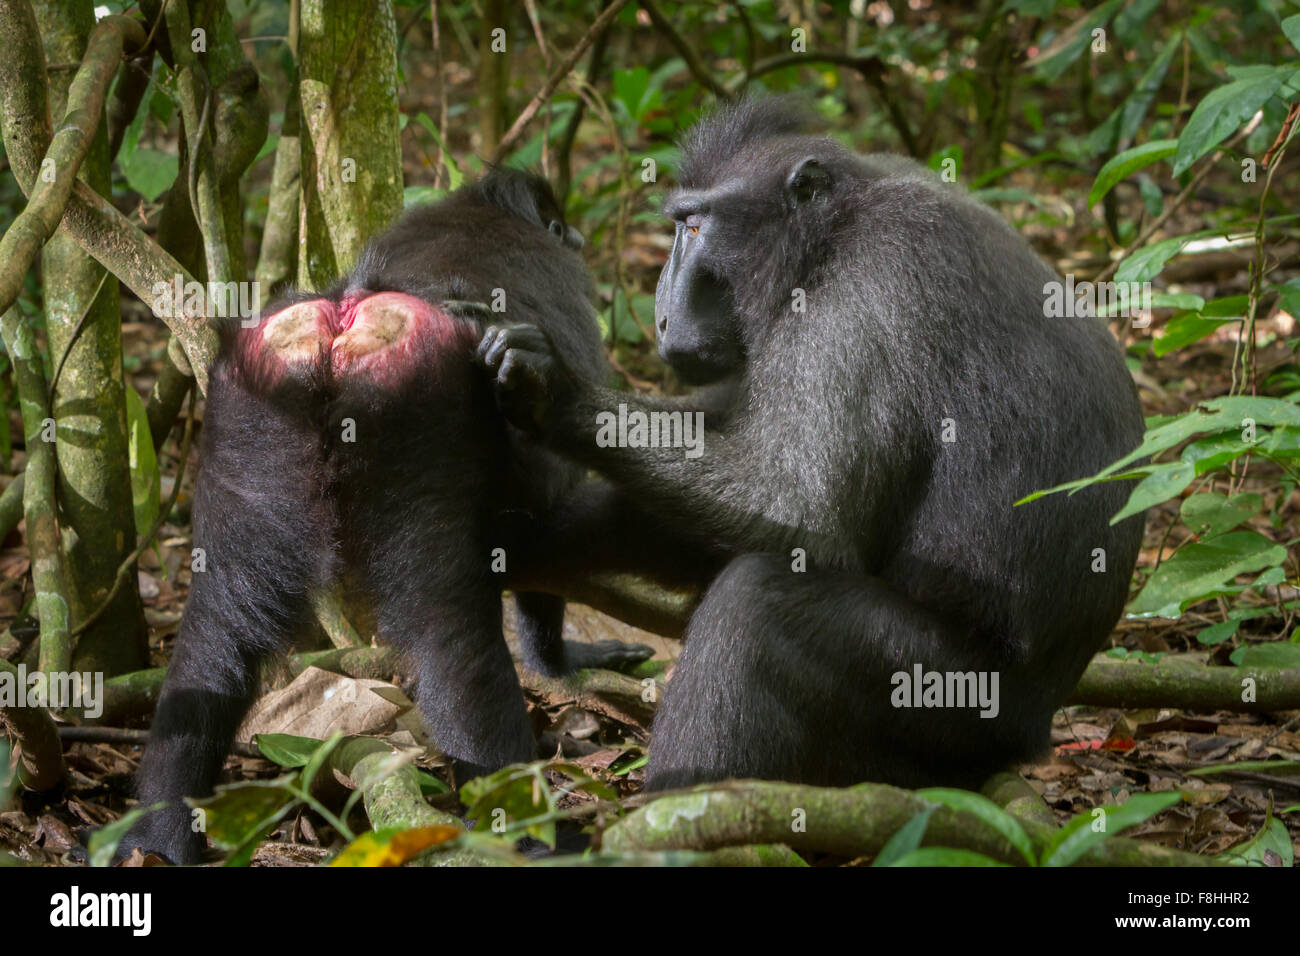 A Sulawesi black-crested macaque (Macaca nigra) is being groomed by another individual on forest floor in Tangkoko Nature Reserve, Indonesia. Stock Photo